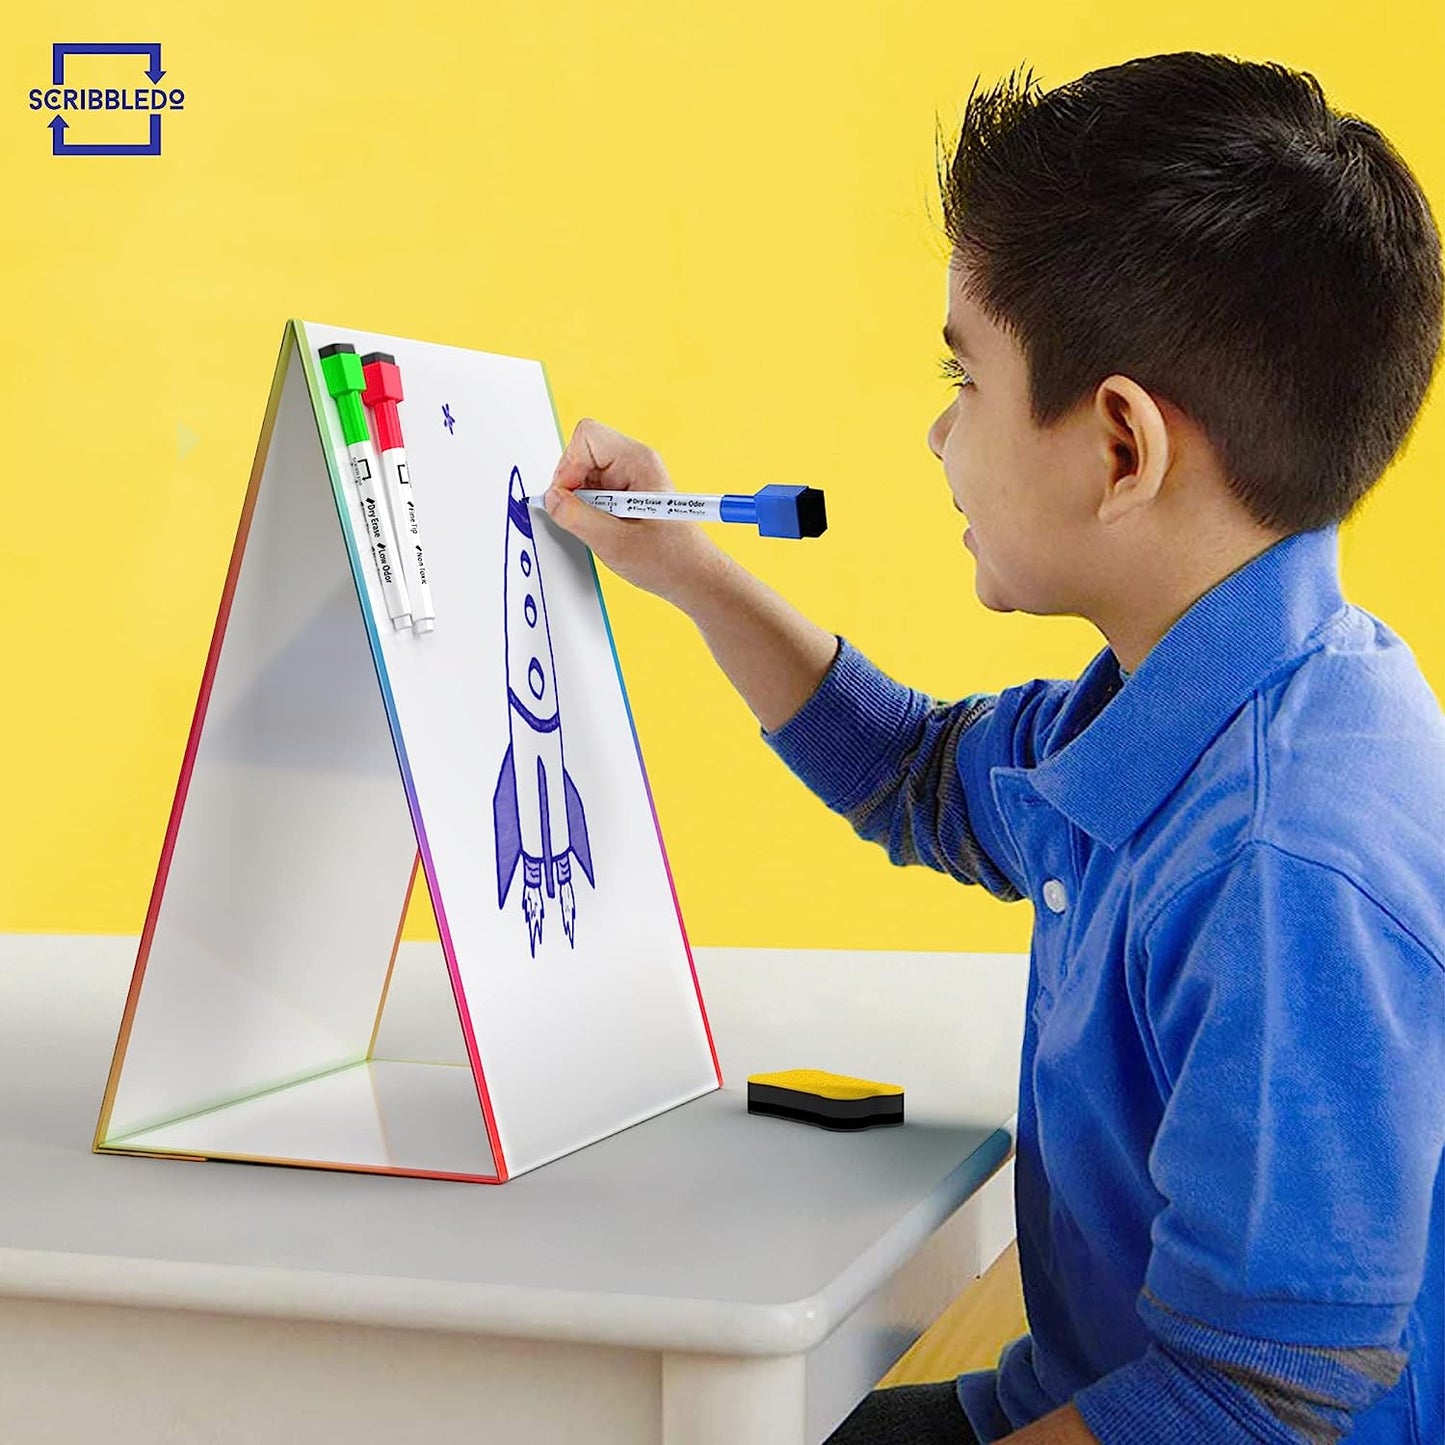 Table Top Magnetic Easel Whiteboard with 6 Markers and 1 Eraser